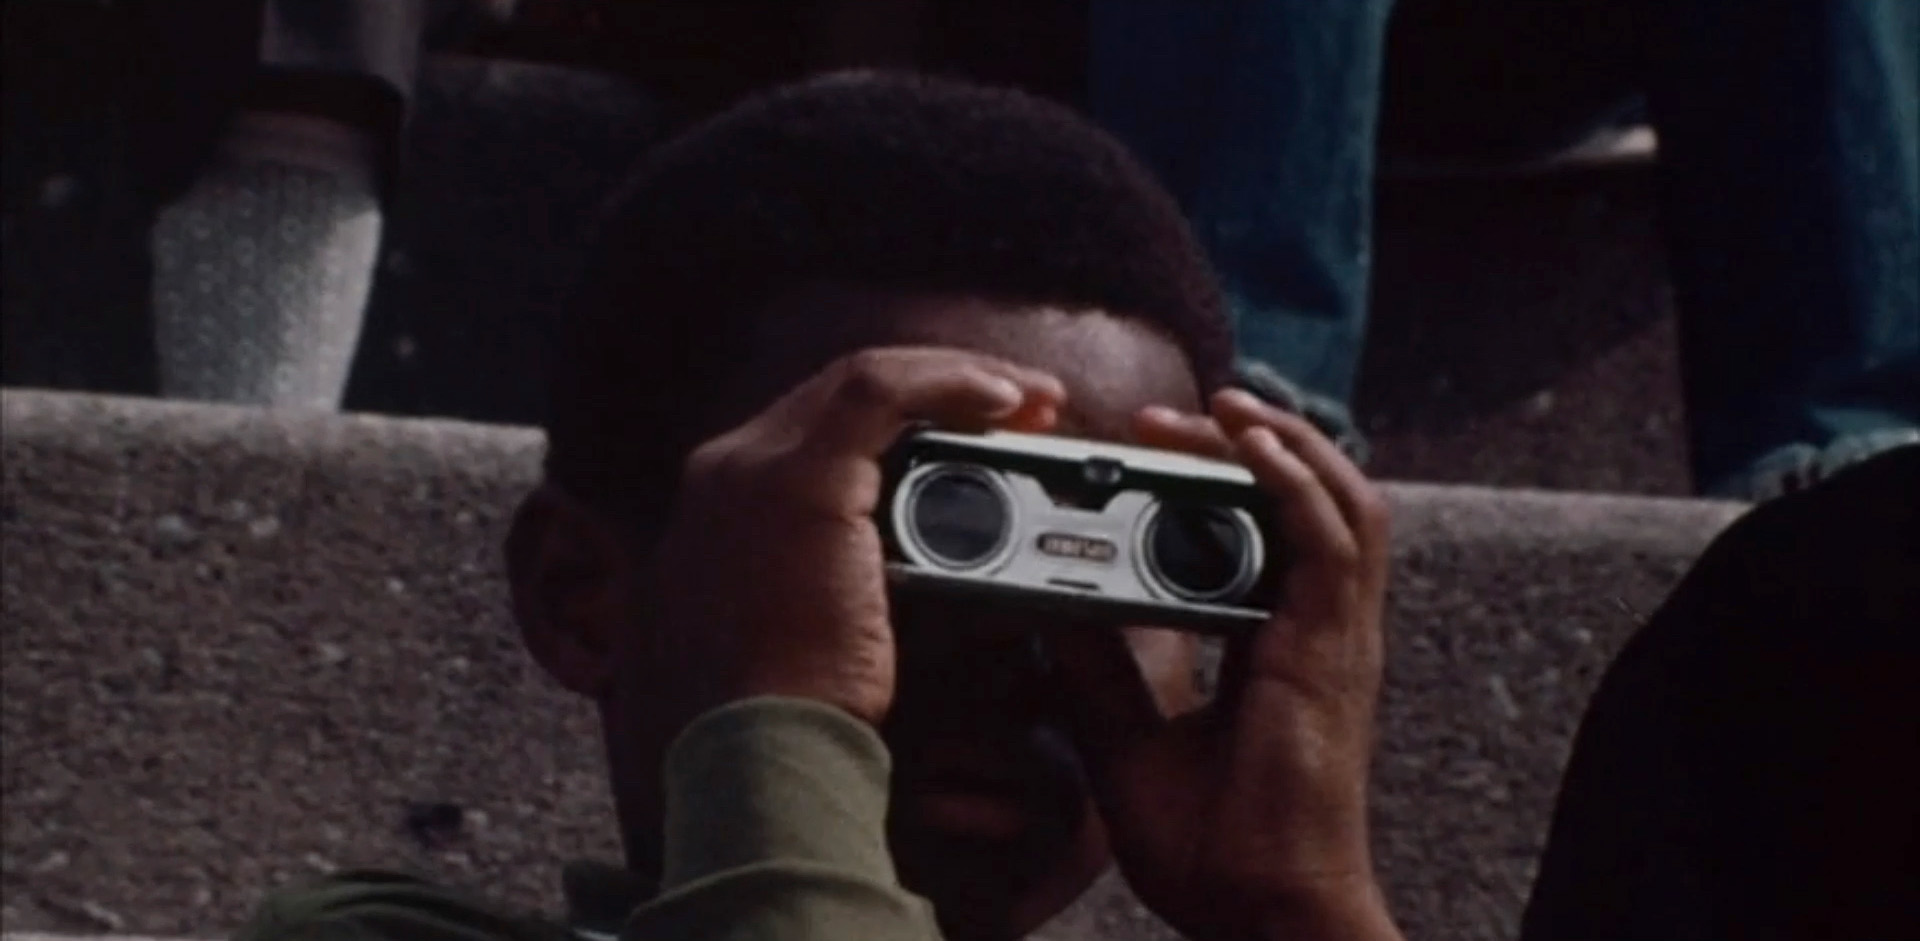 Image of a young Black child holding a viewfinder.